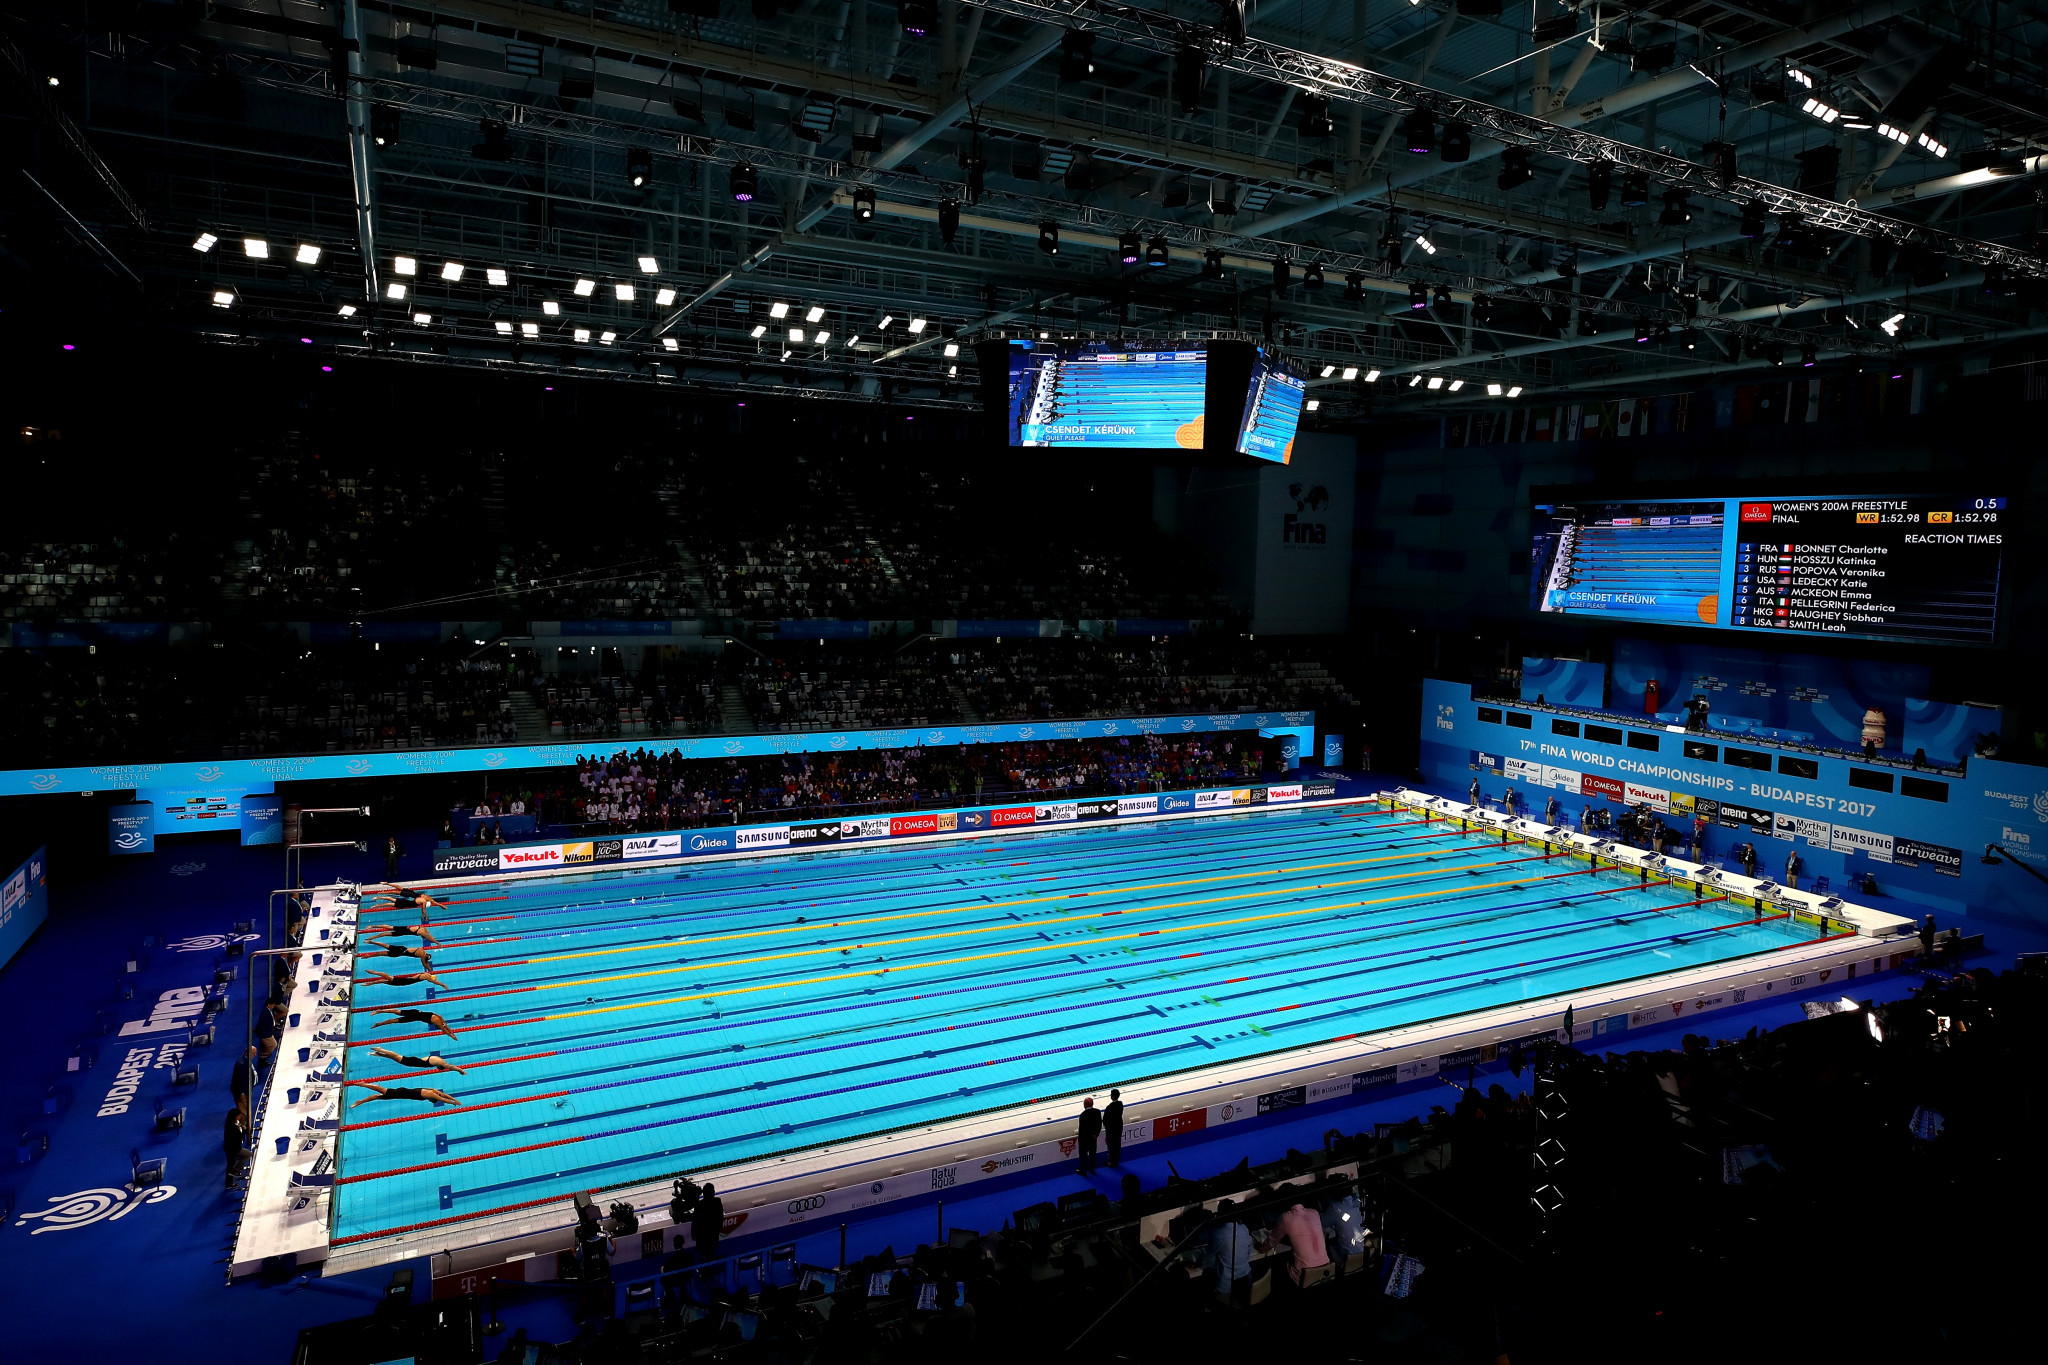 The Duna Arena in Budapest hosted the 2017 World Aquatics Championships ©Getty Images